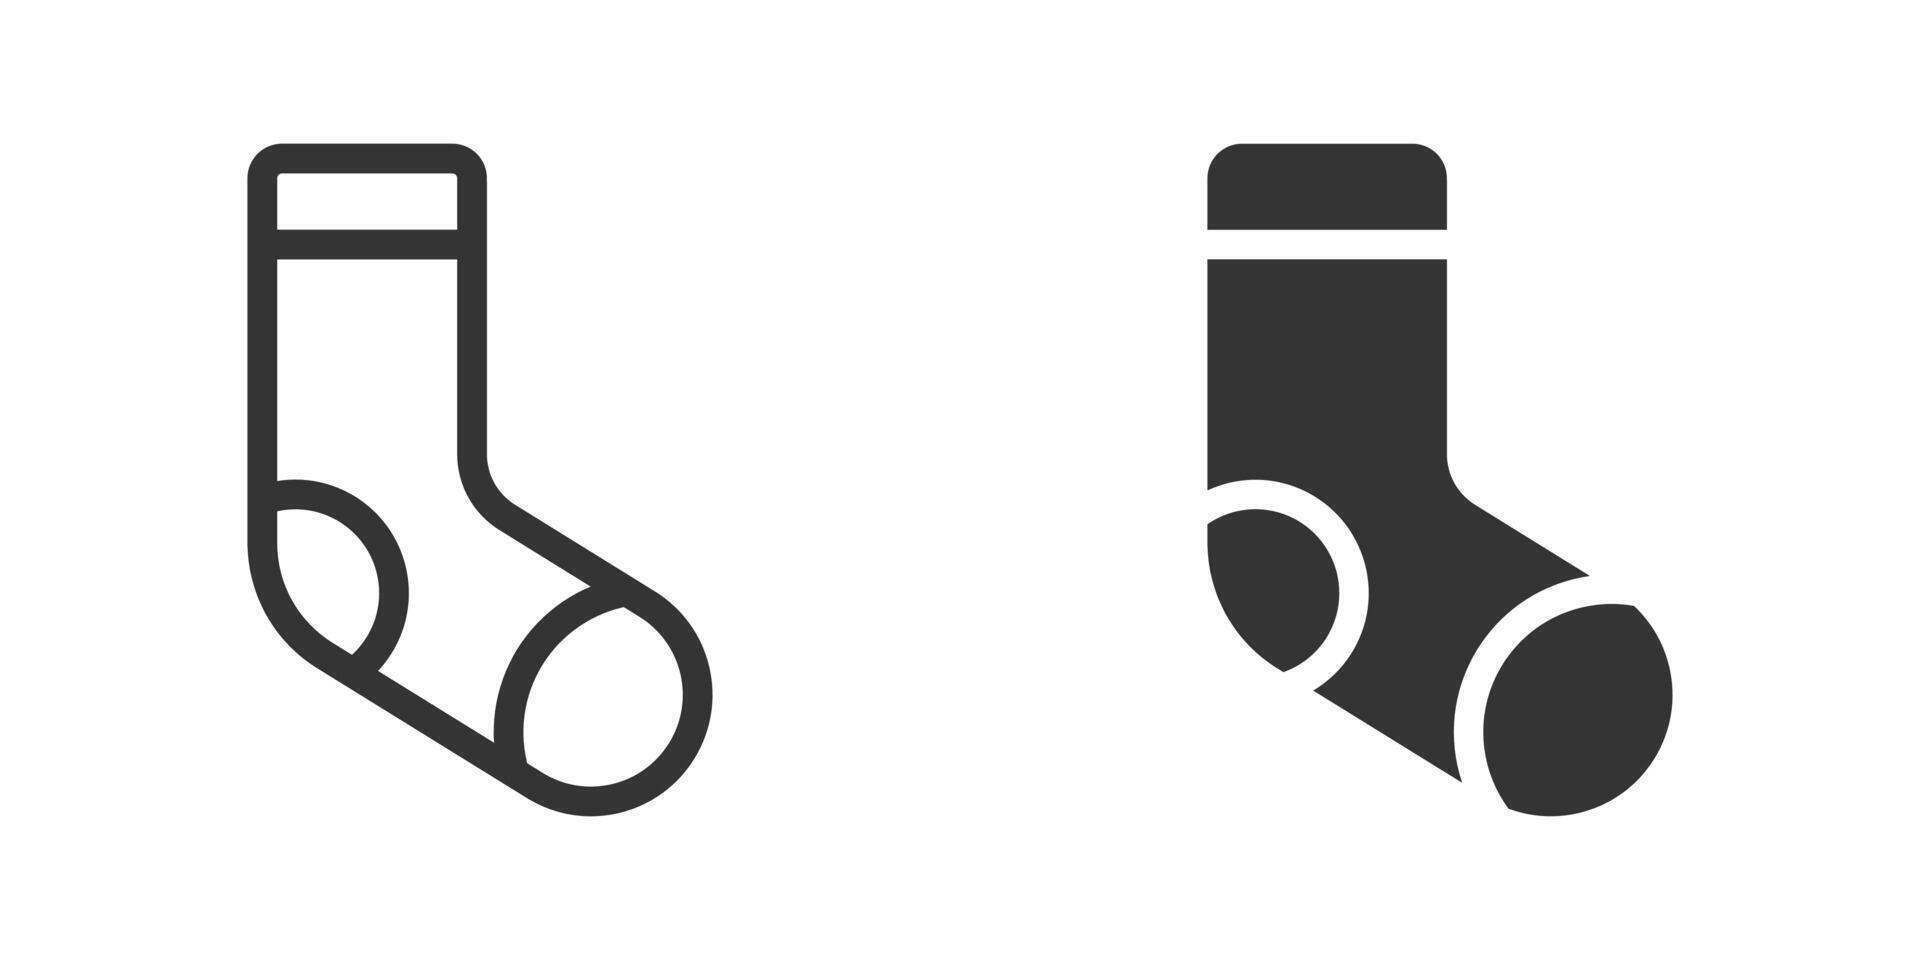 Socks icon isolated on a white background. vector